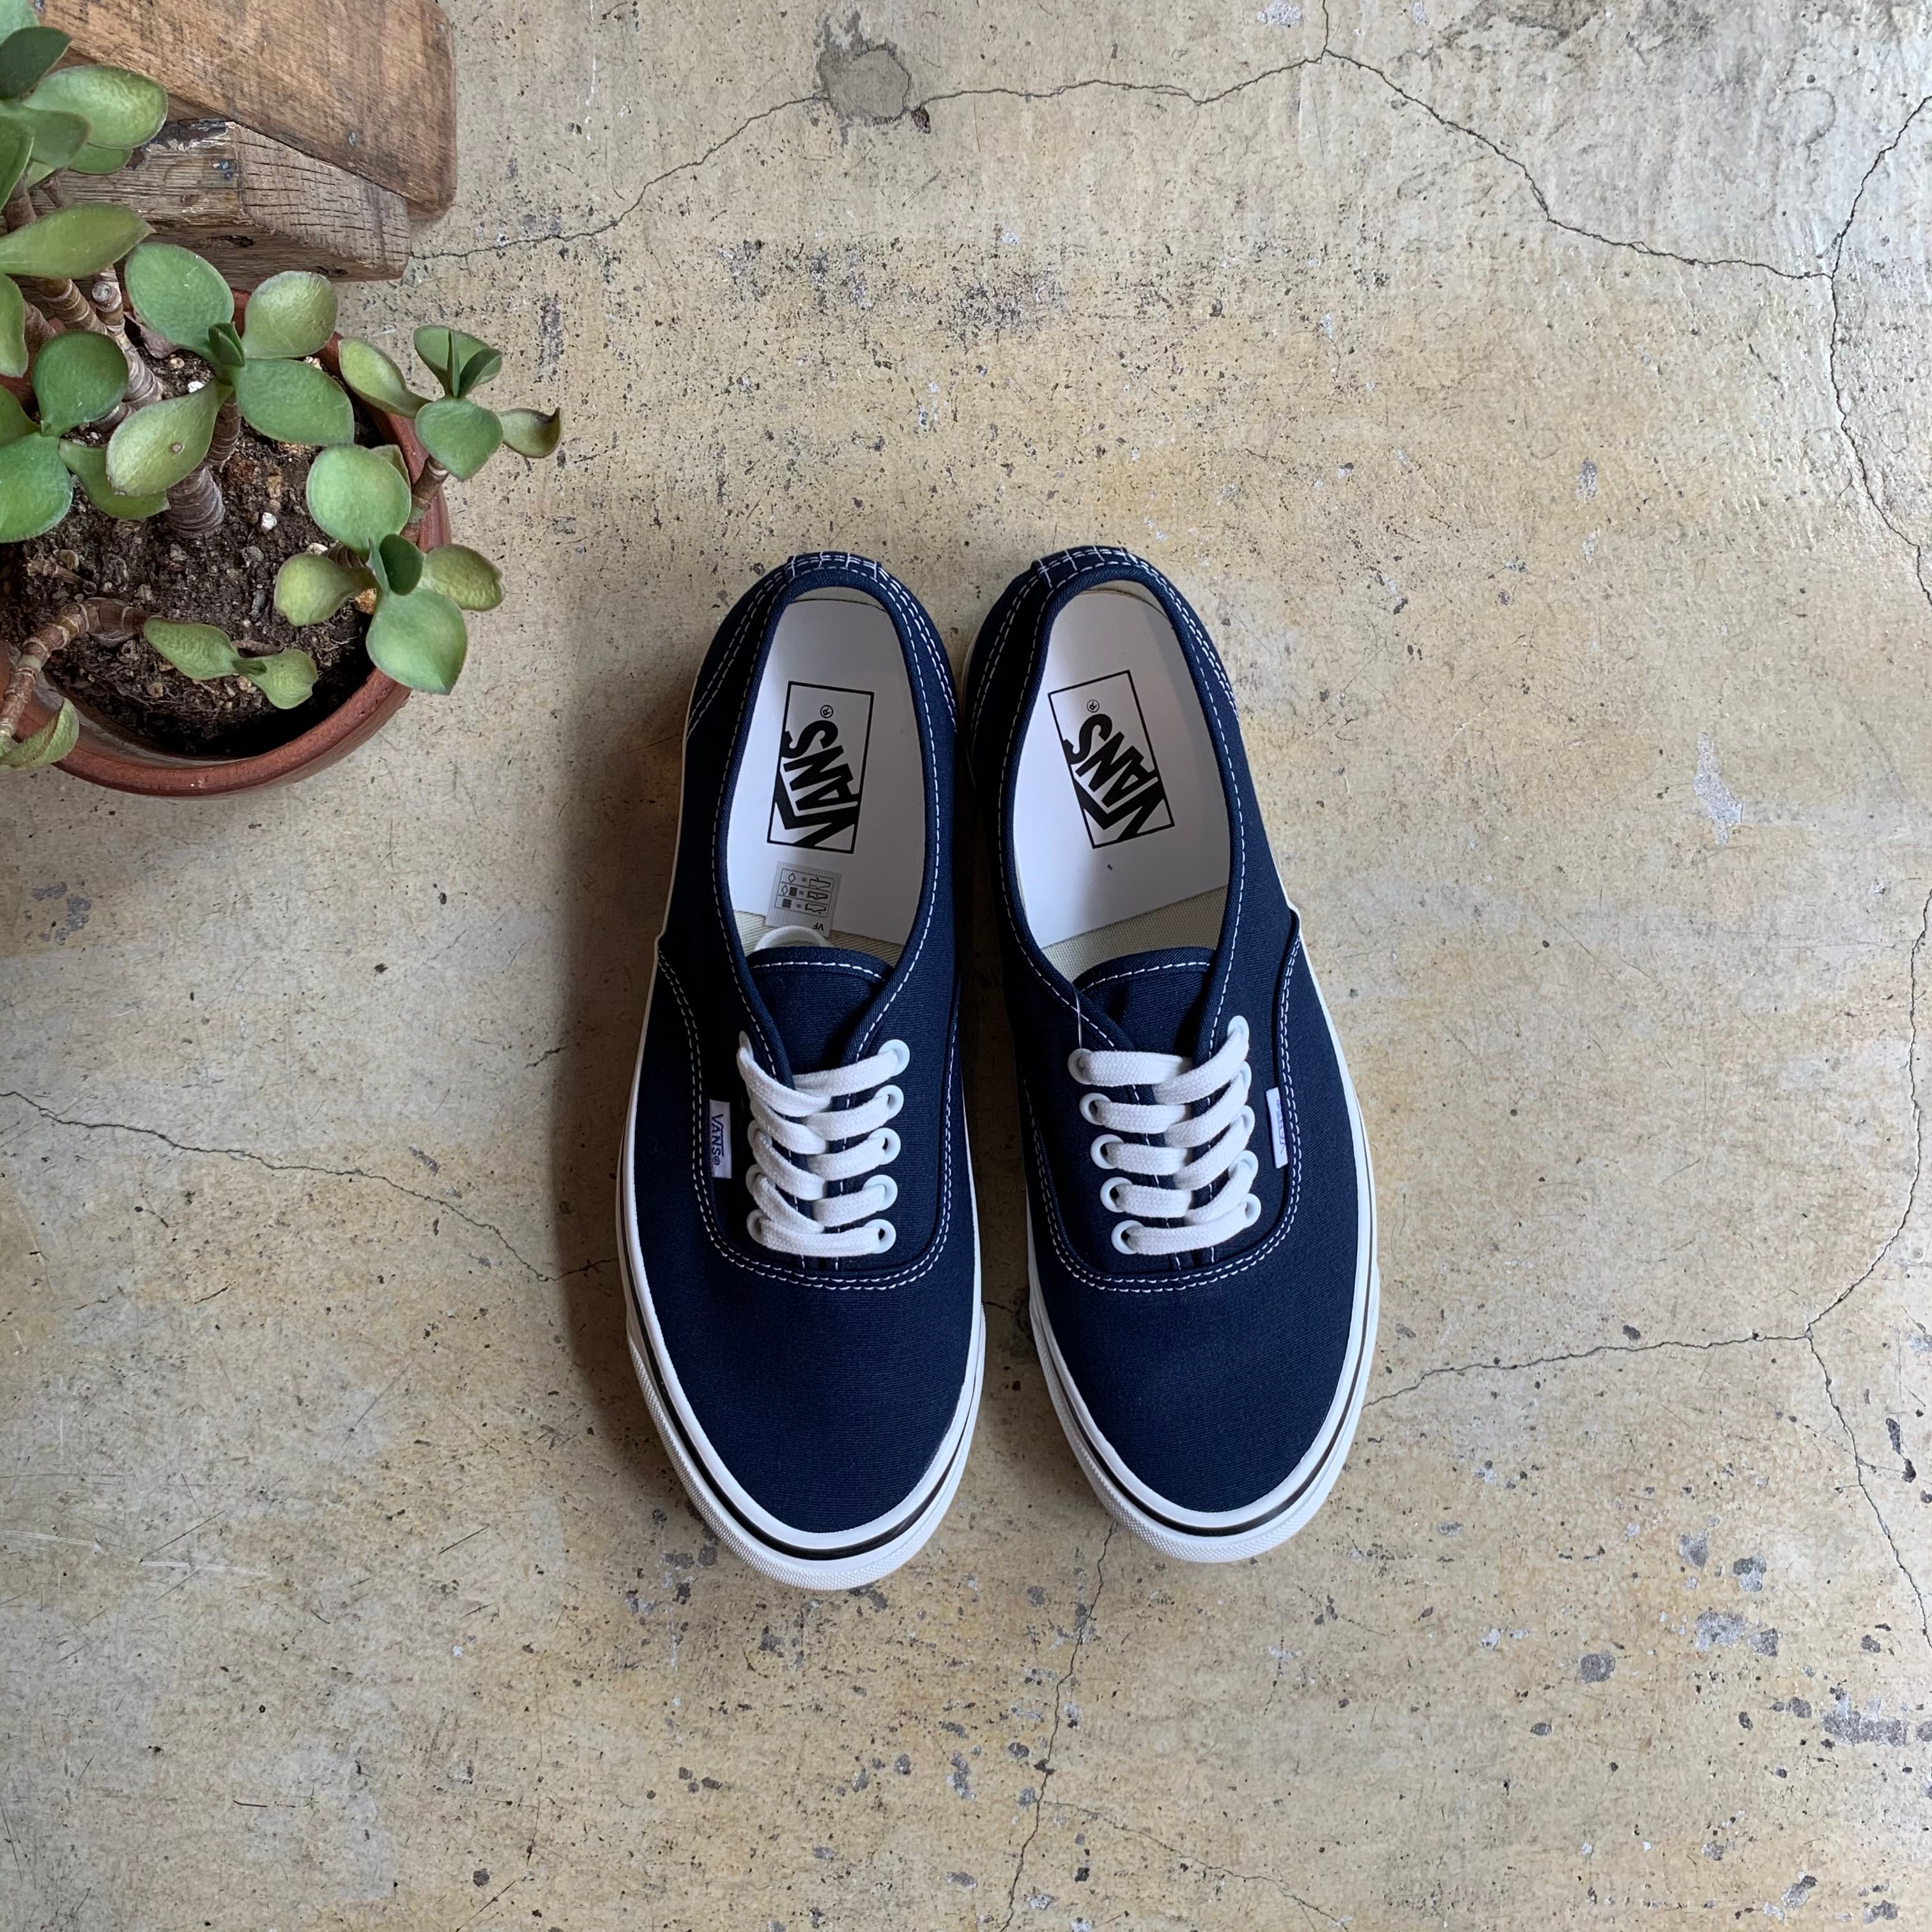 80s-90s VANS USA製 authentic US6 - スニーカー